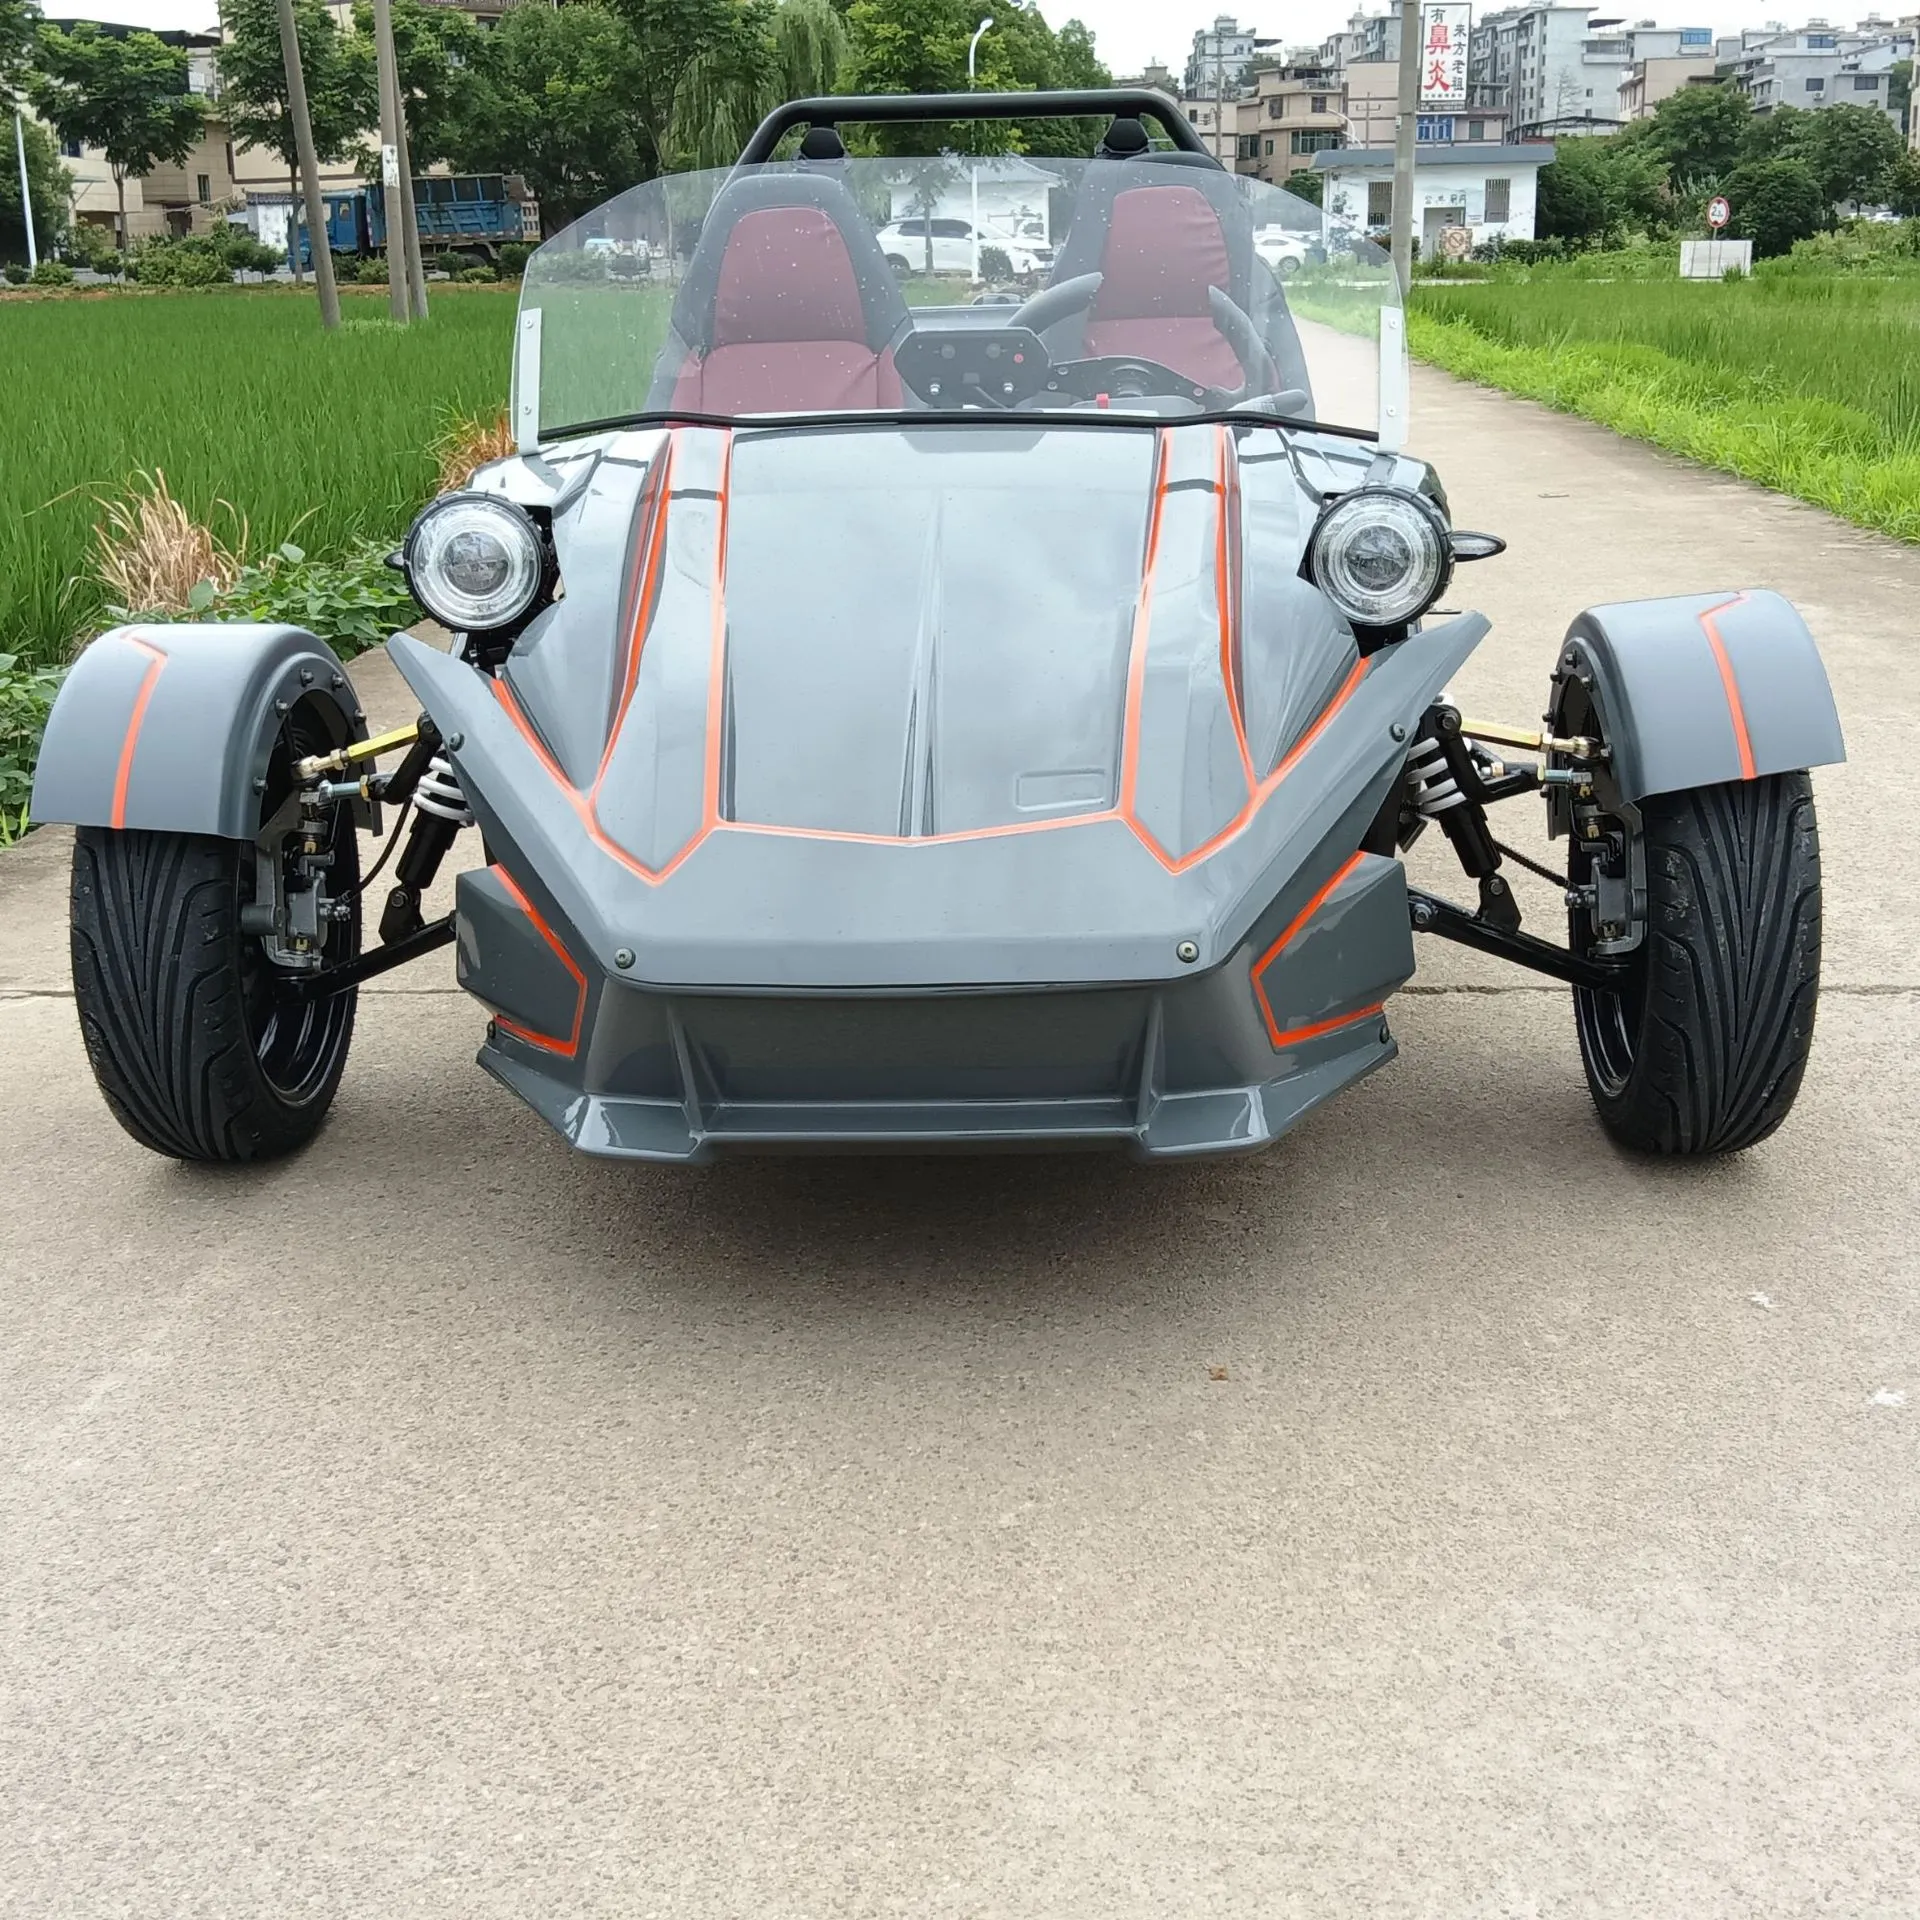 The new three-wheeled motorcycle modified shock absorber ATV farmer's car kart four-wheeled off-road vehicle classic car electric kart